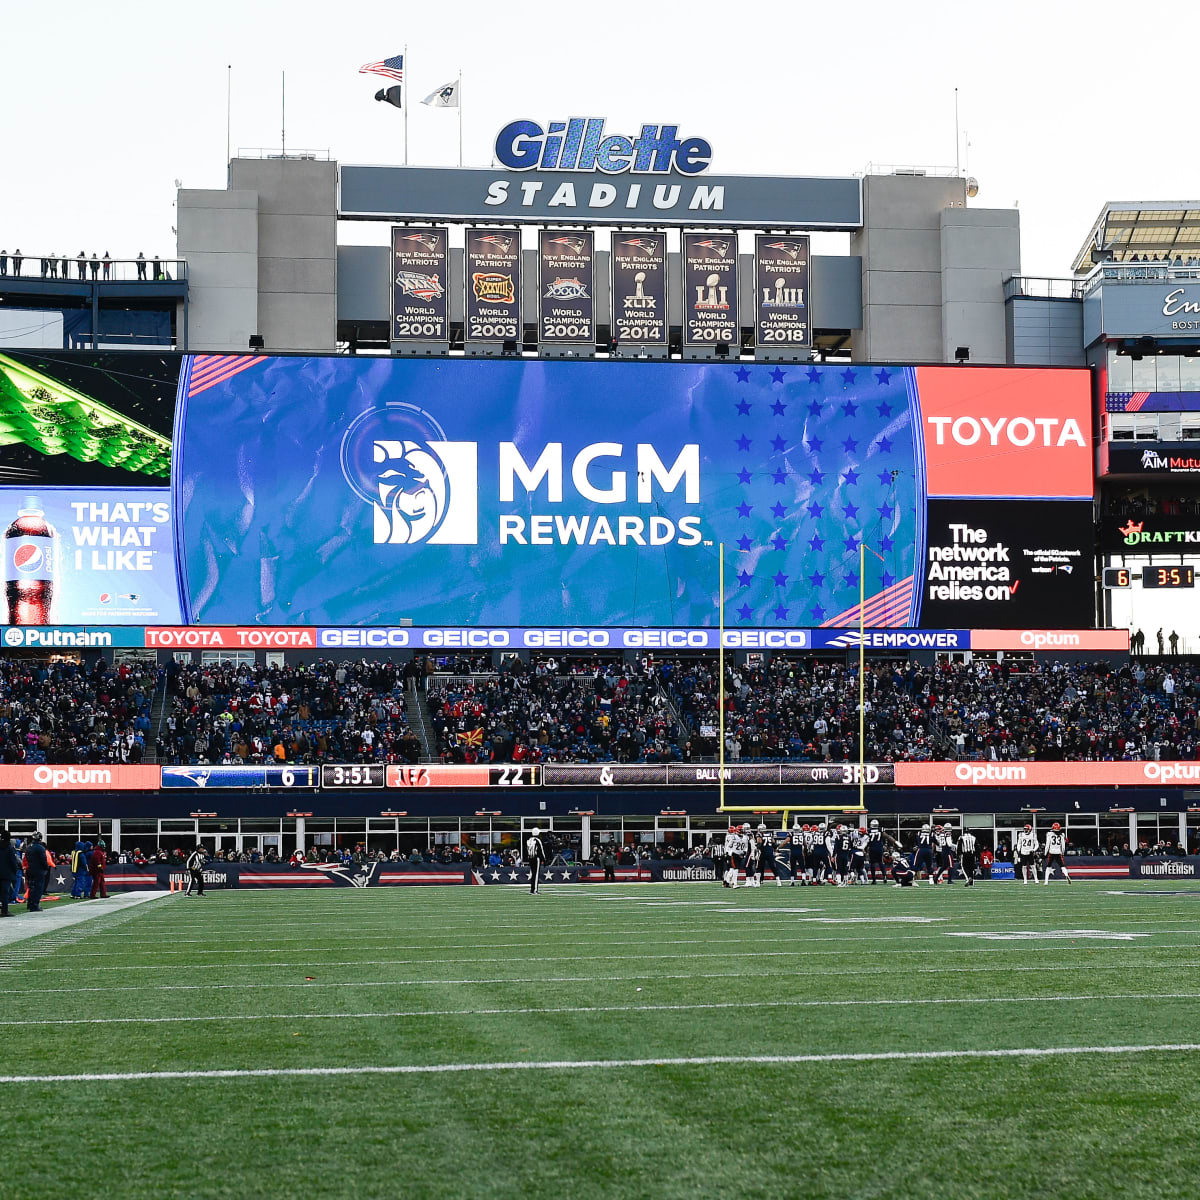 Patriots provide an update on renovations at Gillette Stadium - A